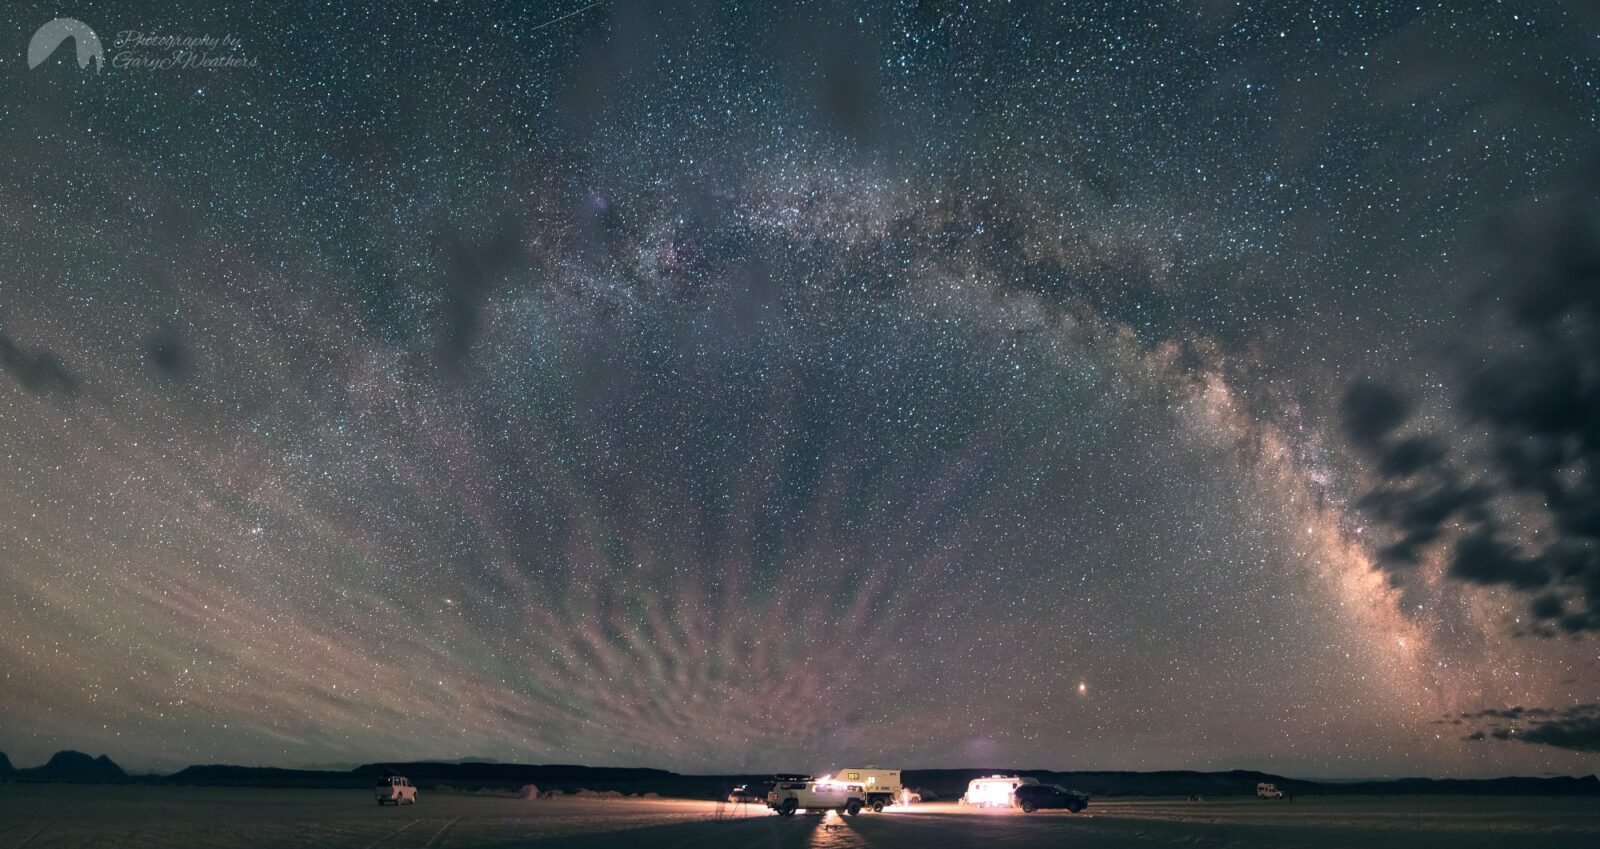 Oregon Is Now Home To The Largest ‘Dark Sky Sanctuary’ In the World